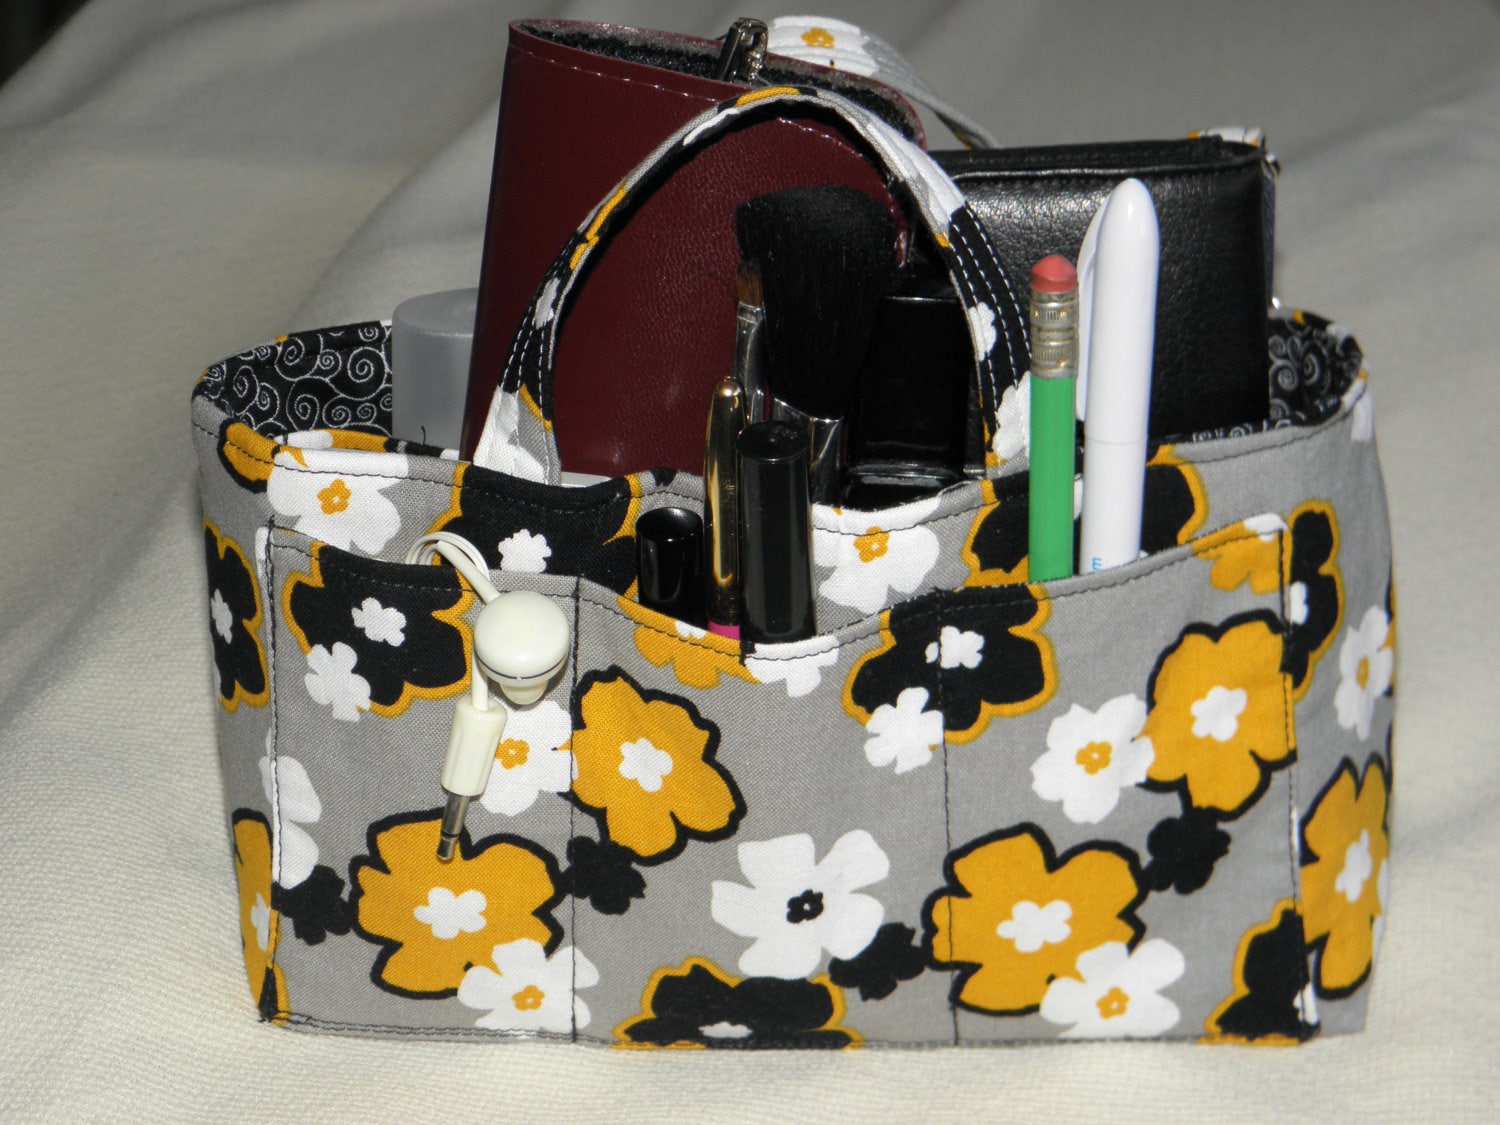 Purse Insert Bag Organizer Insert with Handles 12 by CilesBoutique